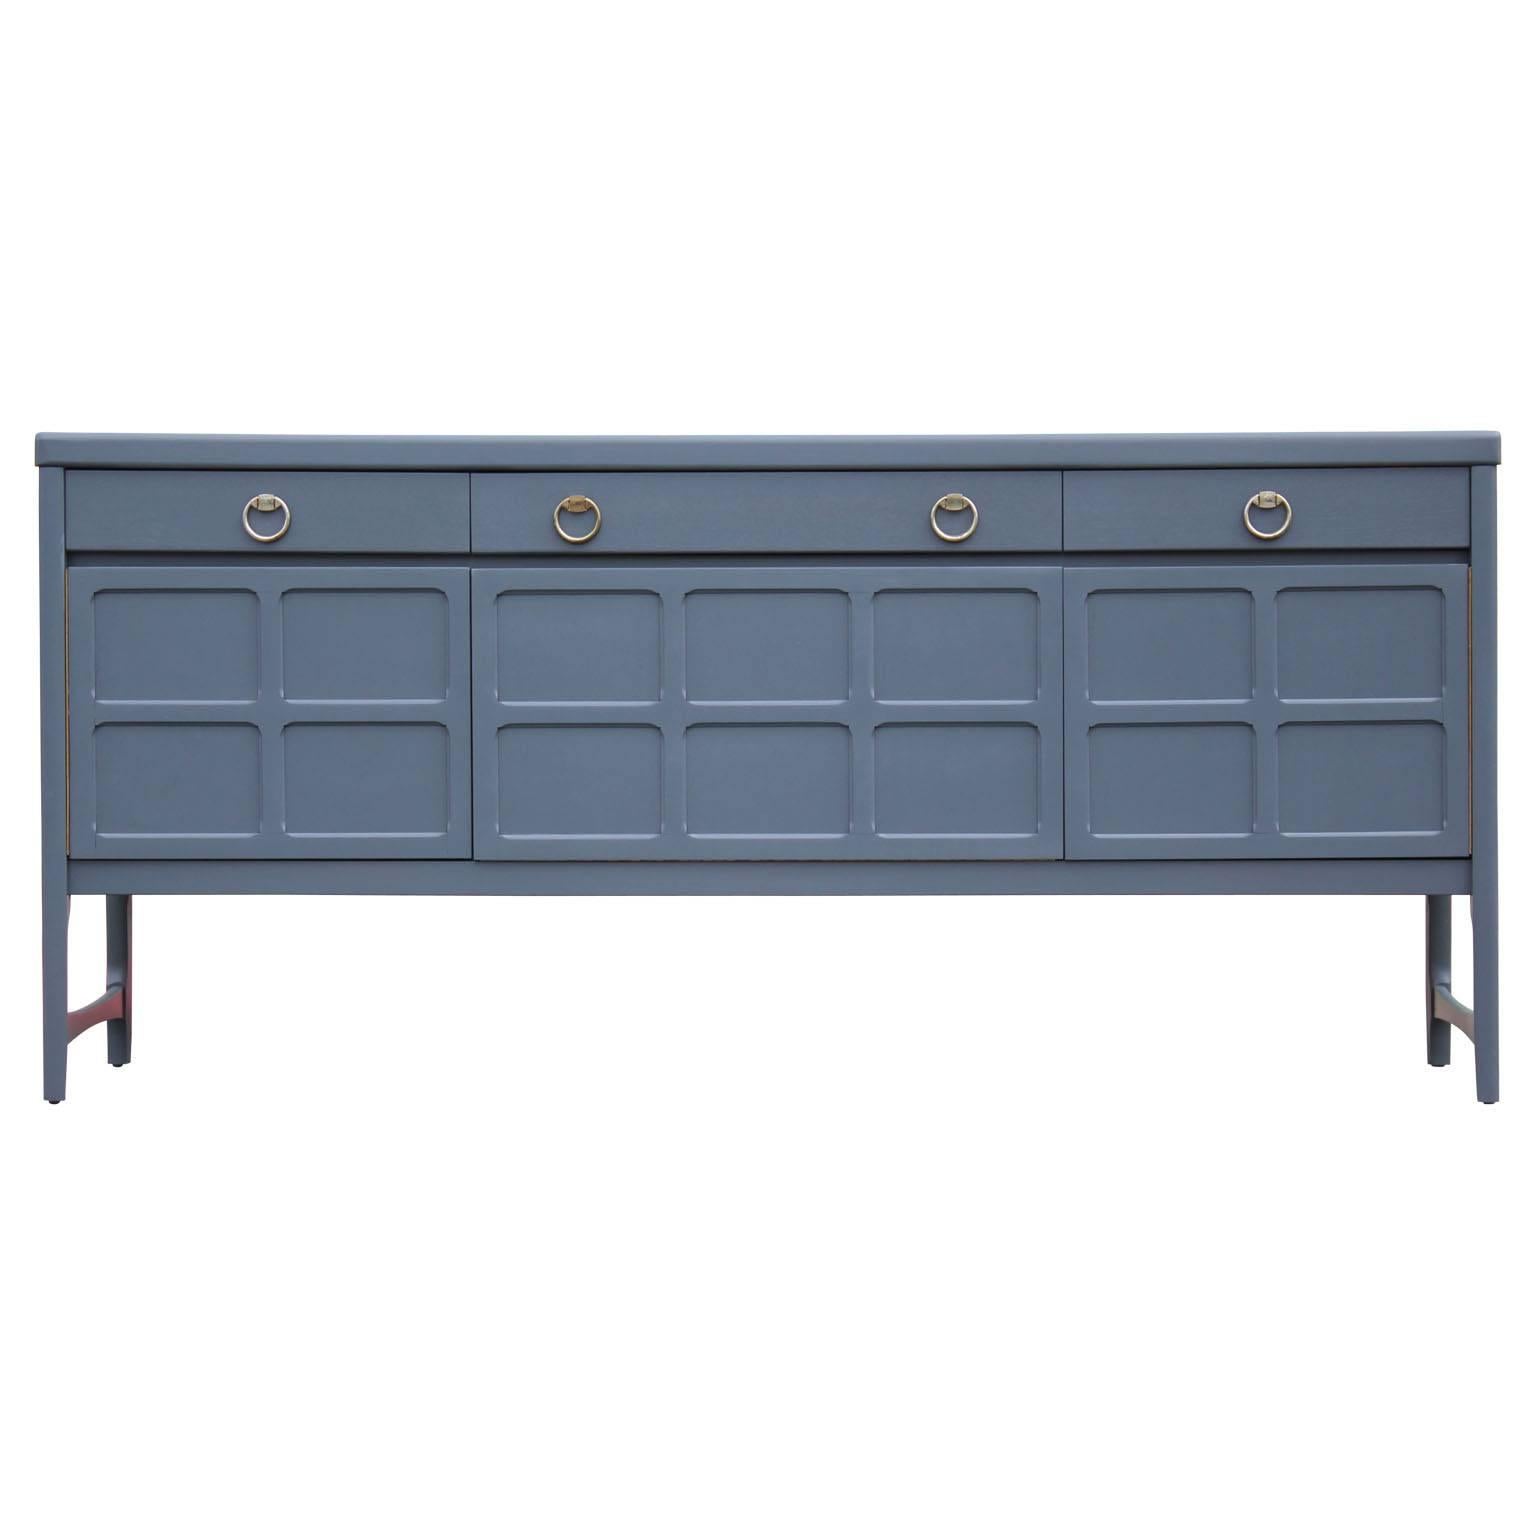 Gorgeous Hollywood Regency style credenza or sideboard freshly stained in a deep blue or grey with brass patinated pulls. Perfect statement piece to any room.